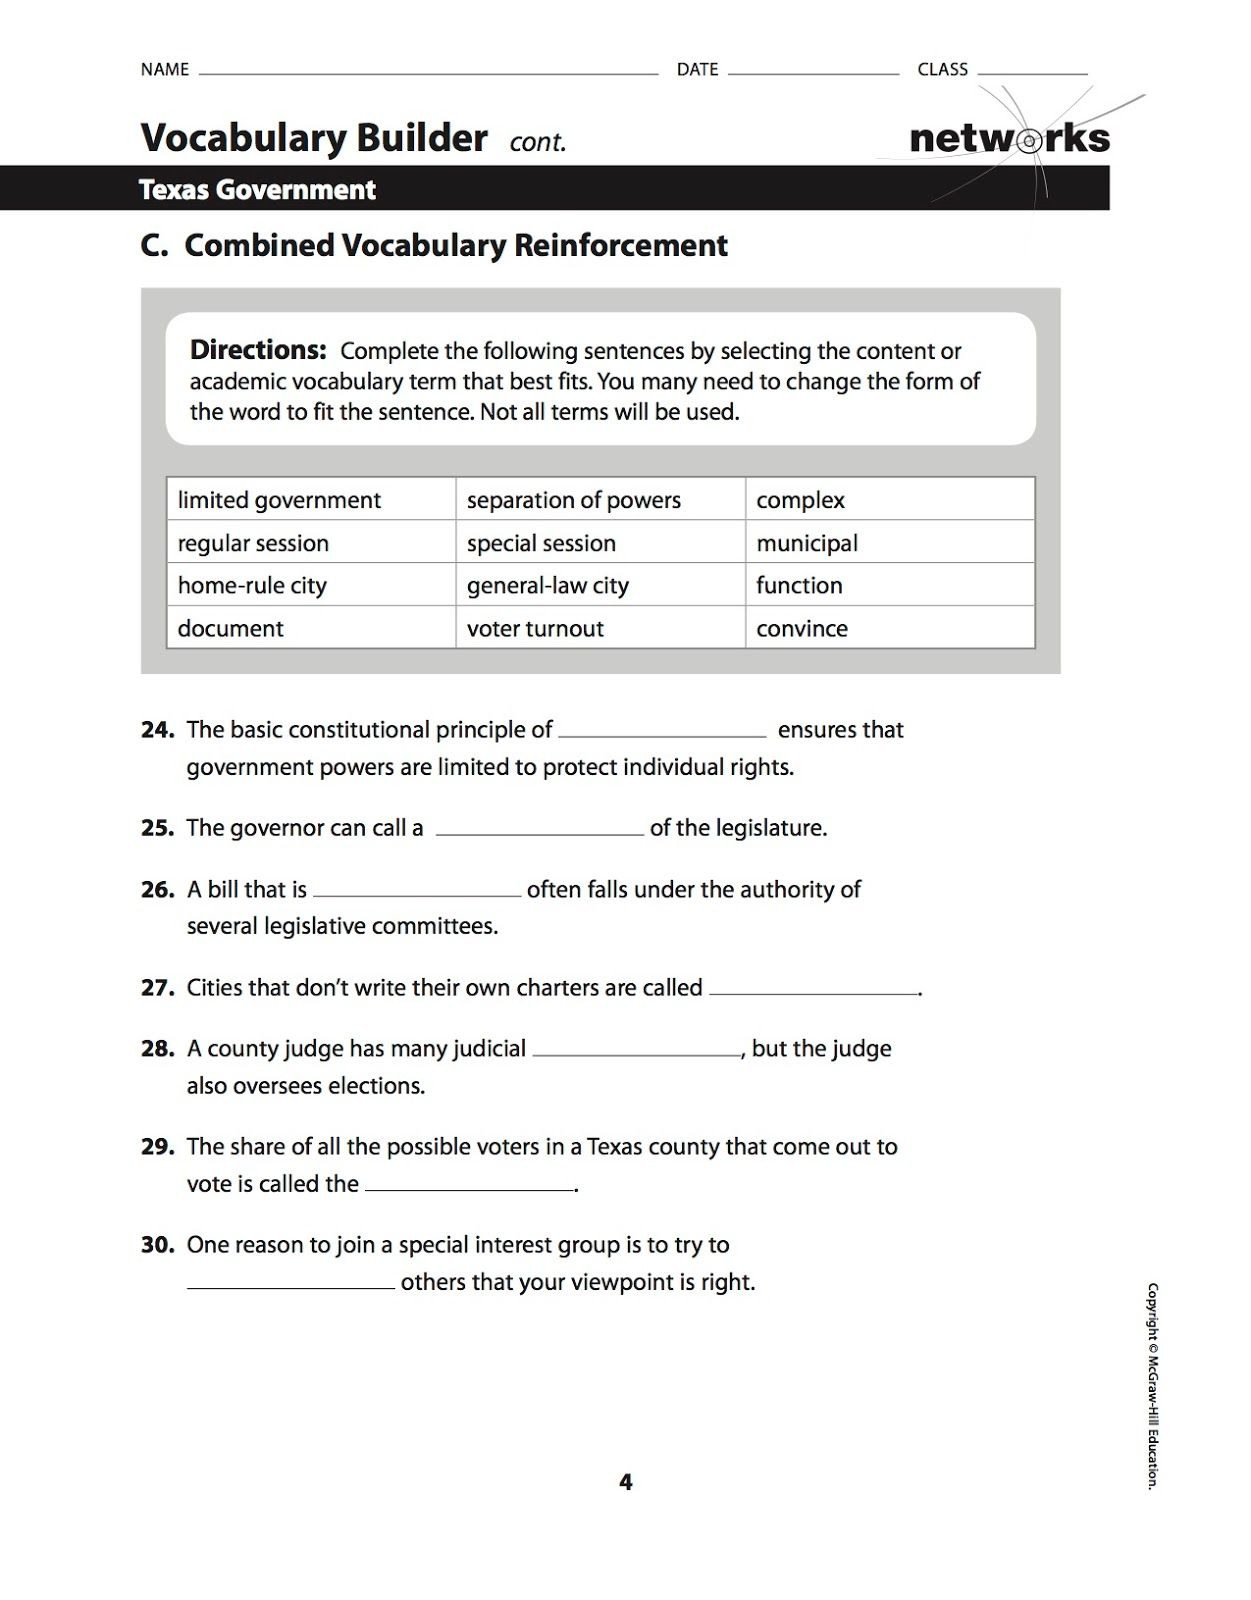 seven-principles-of-ernment-worksheet-answers-db-excel